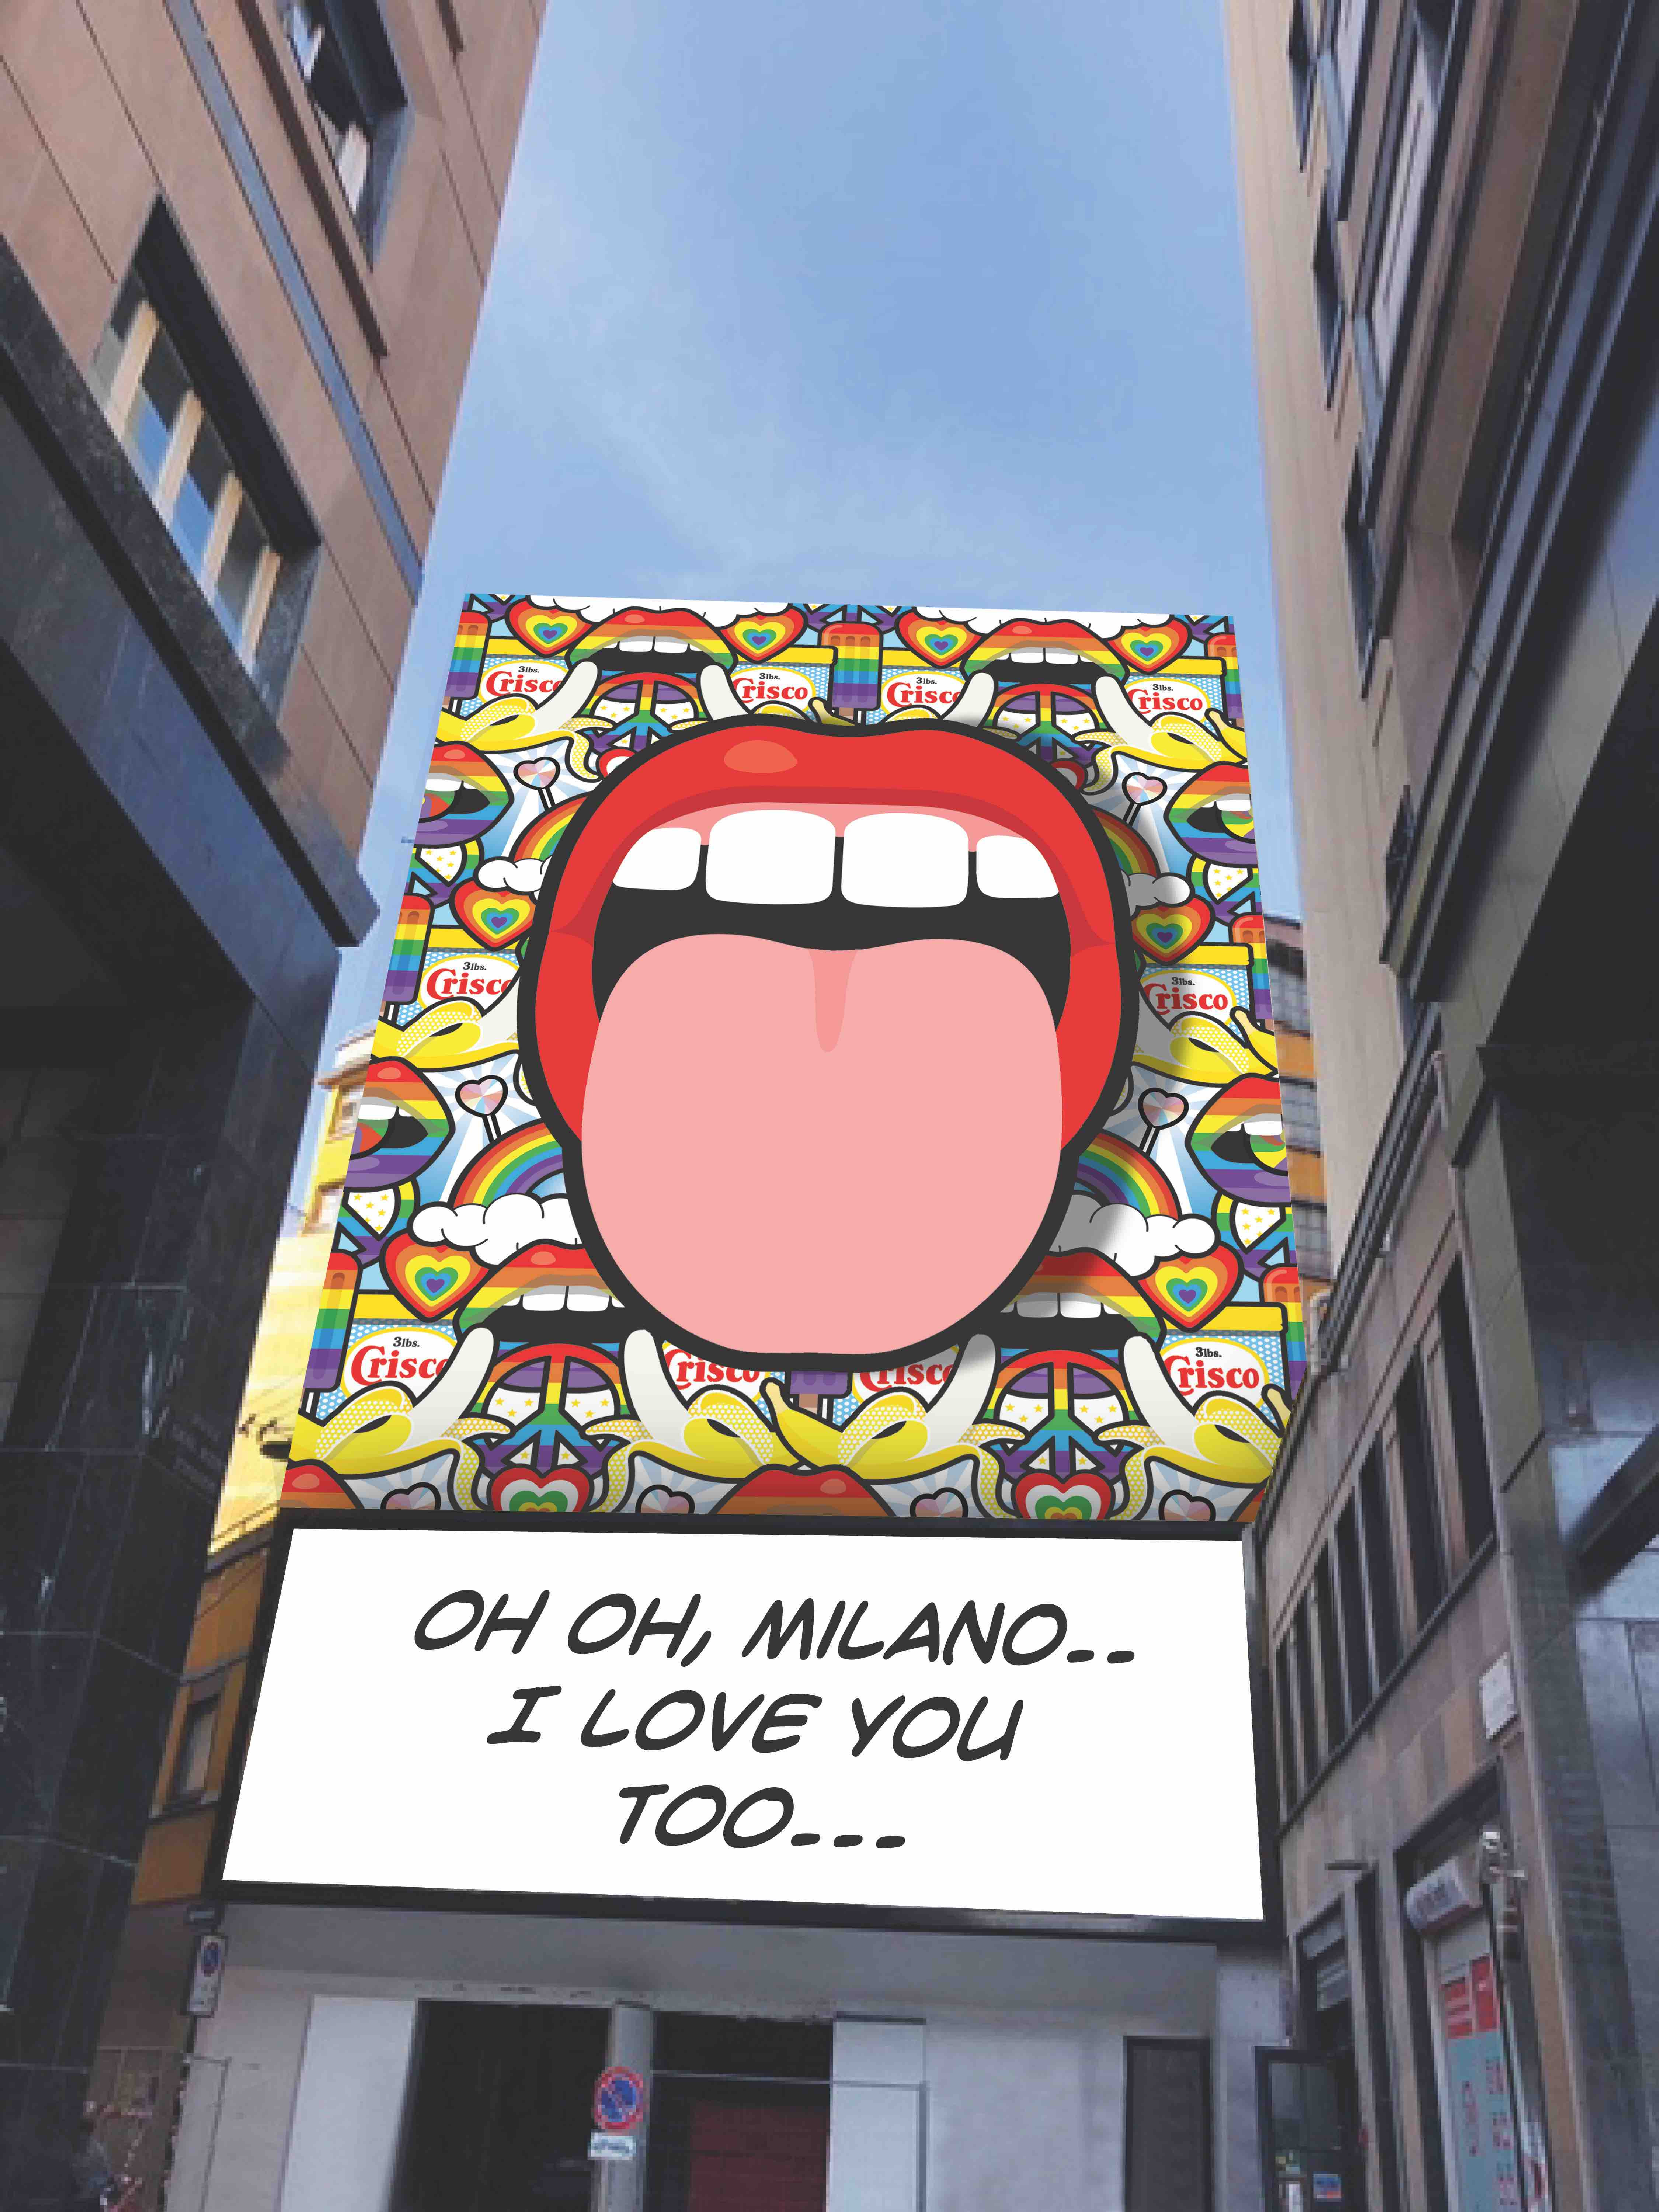 Oh oh Milano I love you too